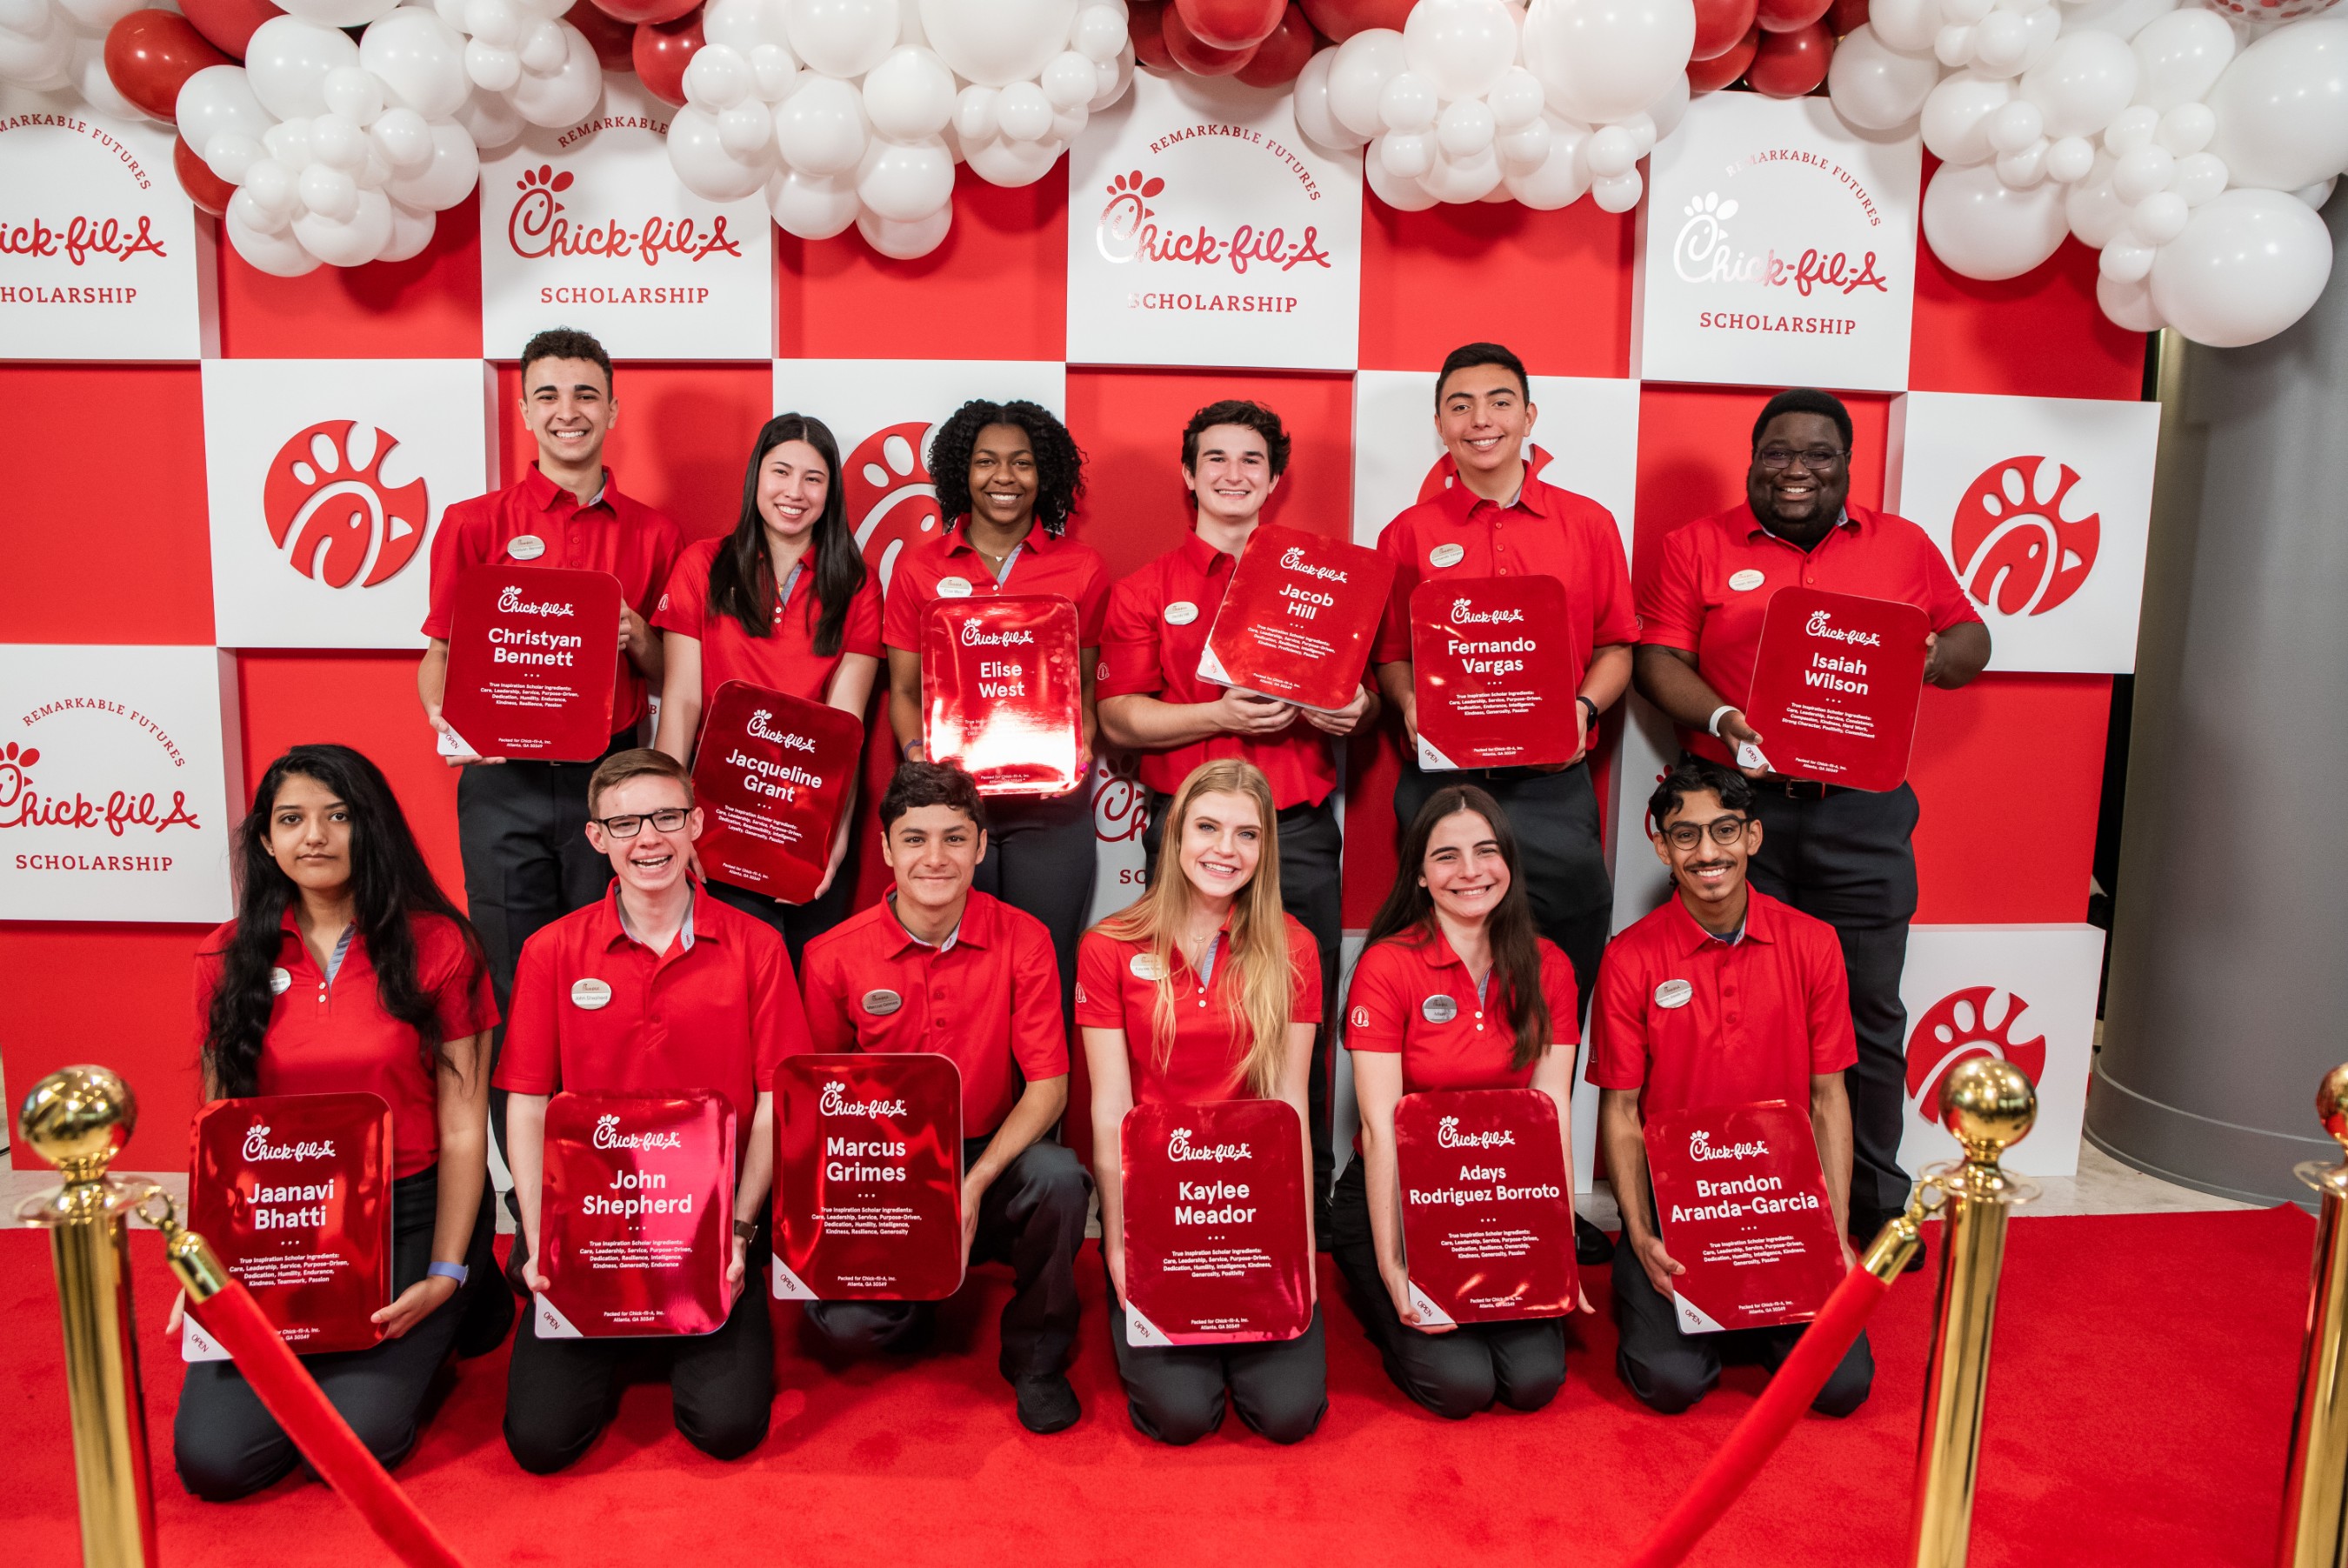 Chick-fil-A awards $24 million in scholarships to 12,699 restaurant Team Members across the U.S. and Canada to help further their education.